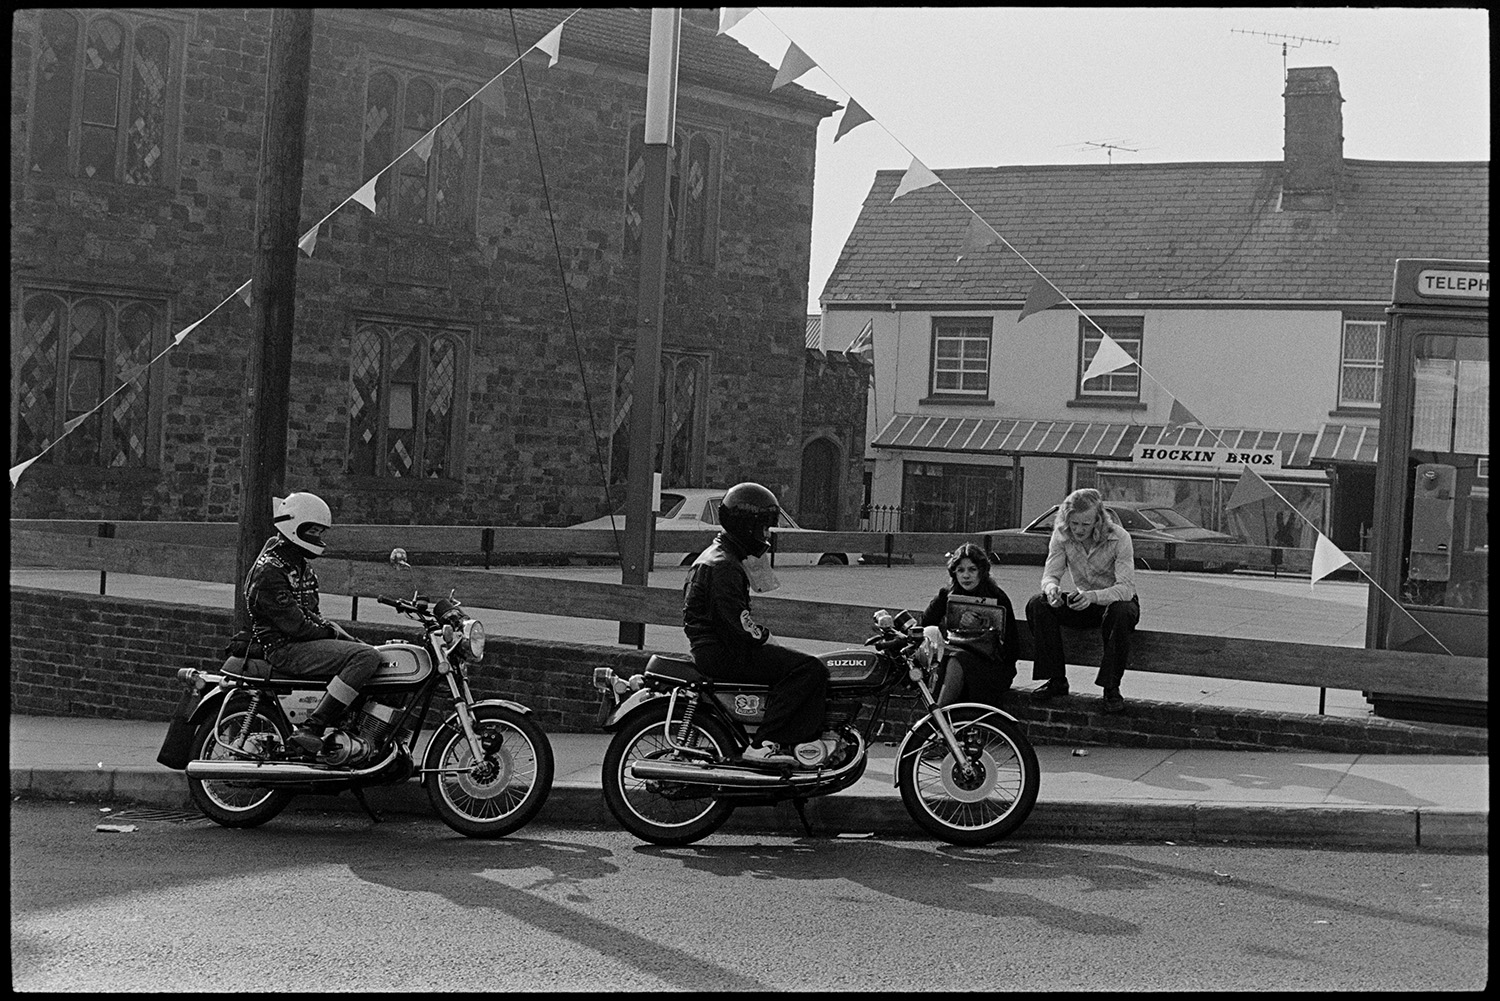 Street scenes, motorbikes. 
[Two people on motorcycles in Market Street, Hatherleigh. Two other teenagers are sat on a wall in the square. A telephone box and Hockin Bros shop front are visible in the background.]